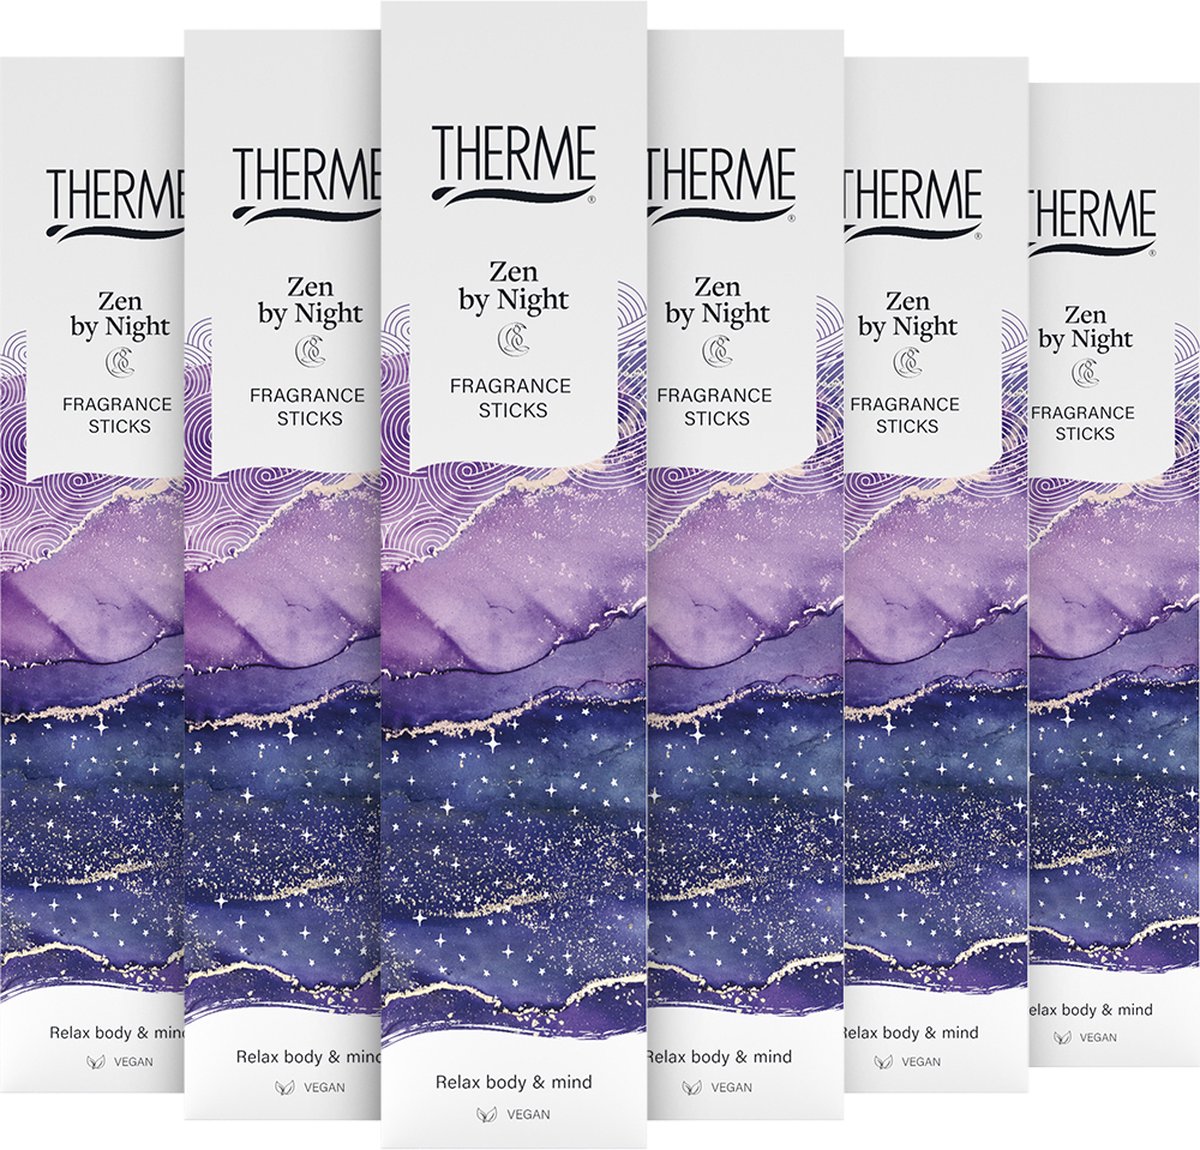 6x Therme Home Spray Zen by Night 60 ml